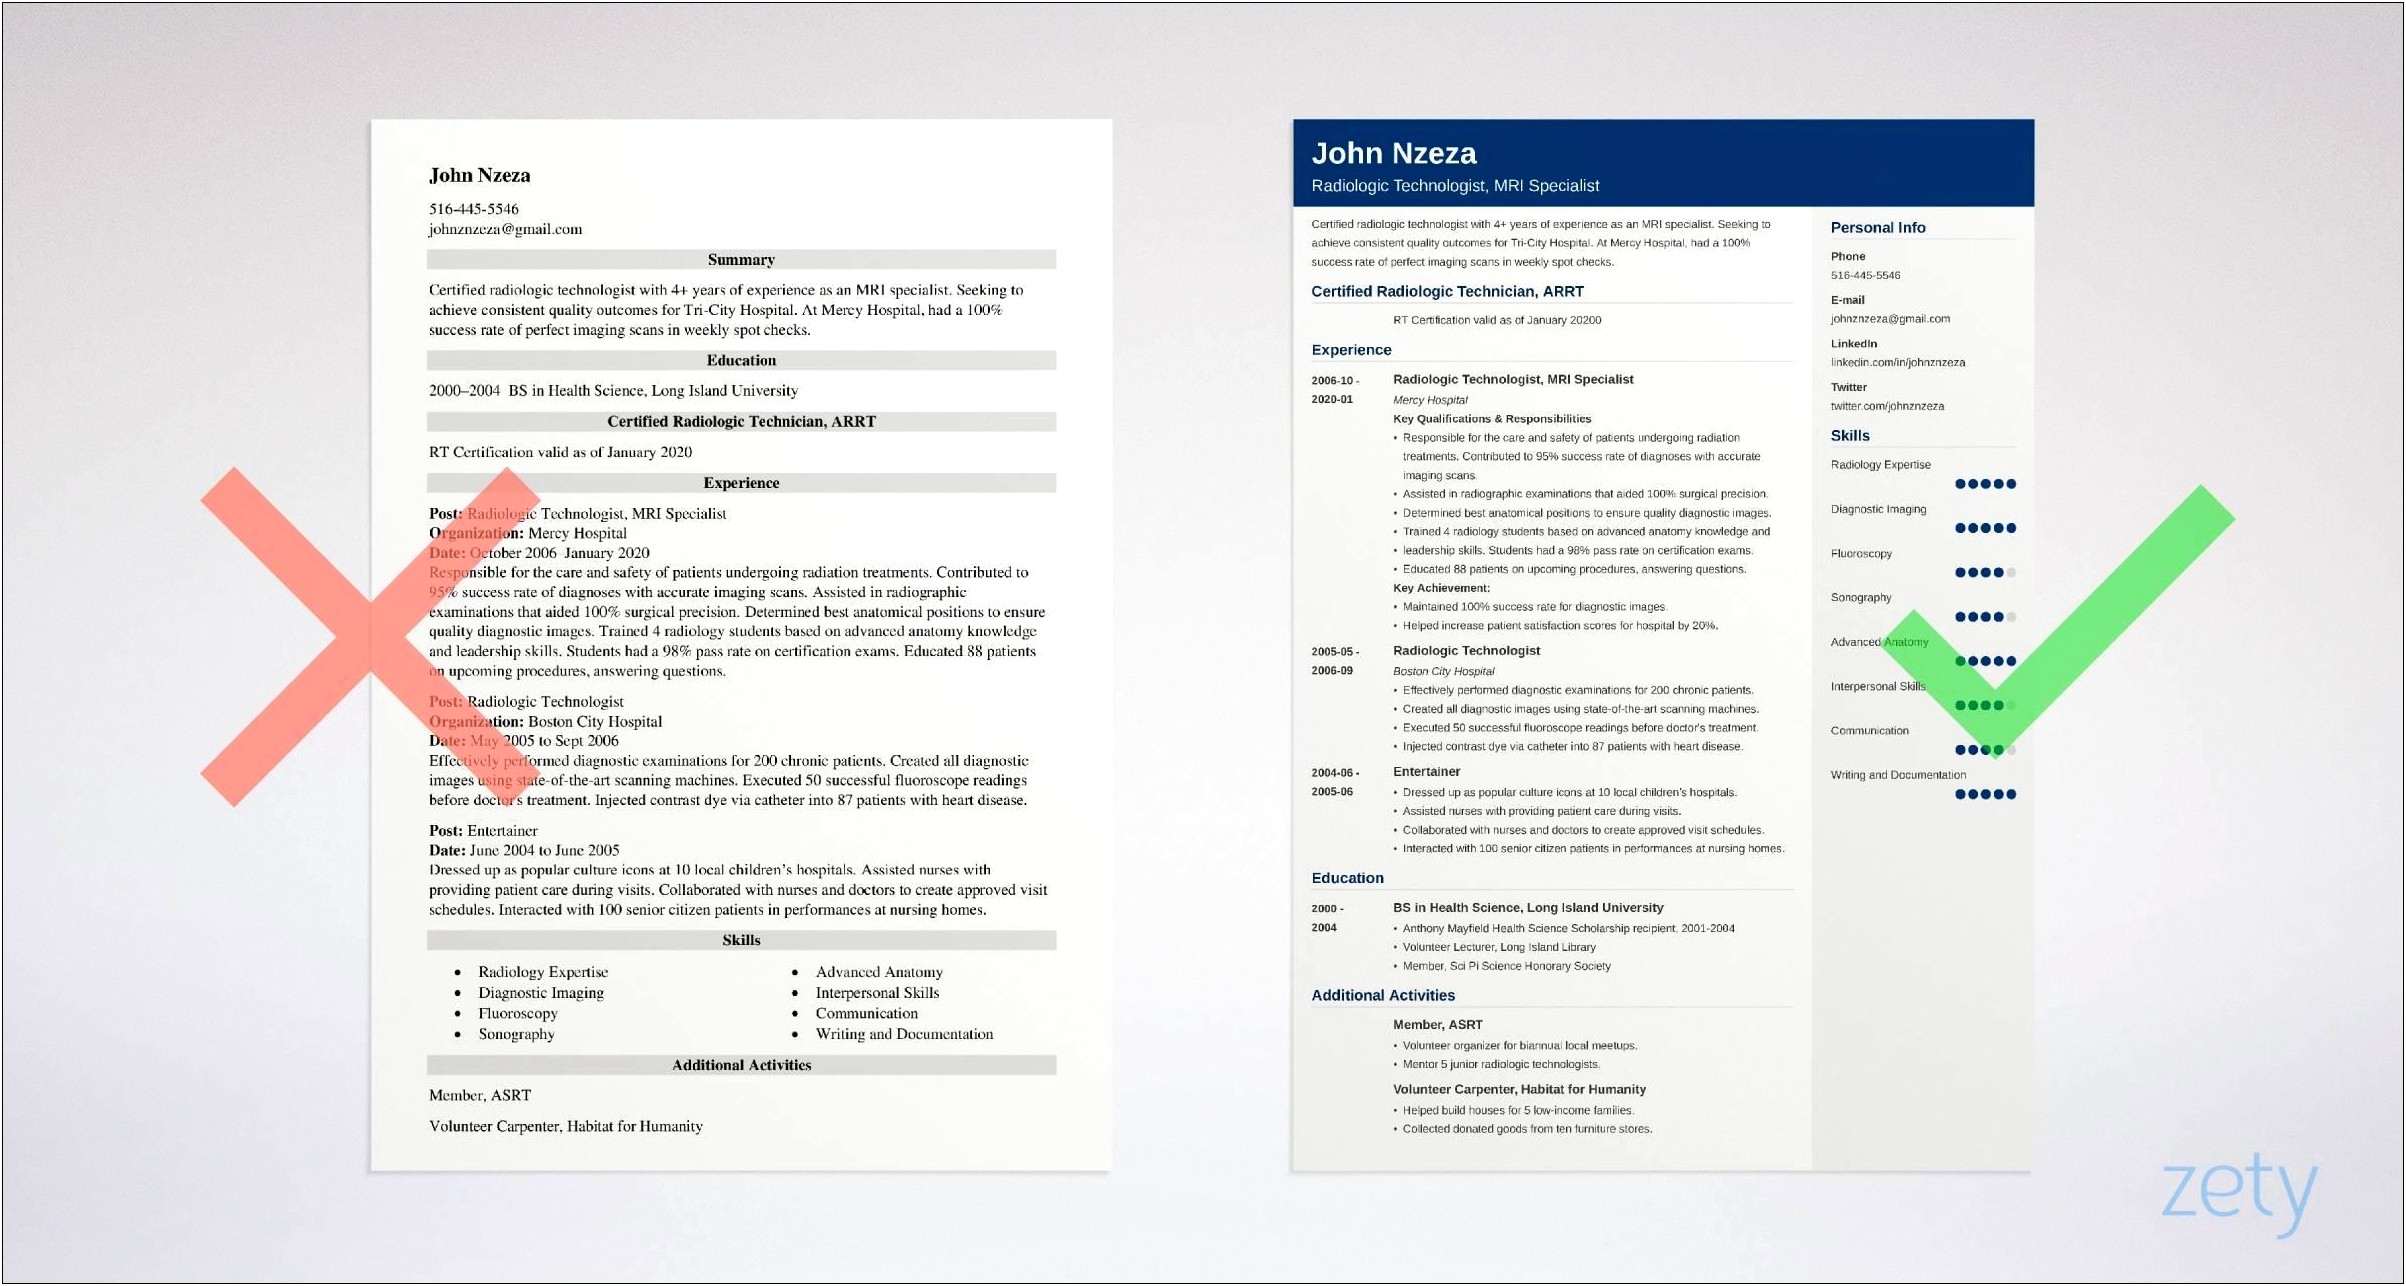 Examples Of X Ray Tech Resume